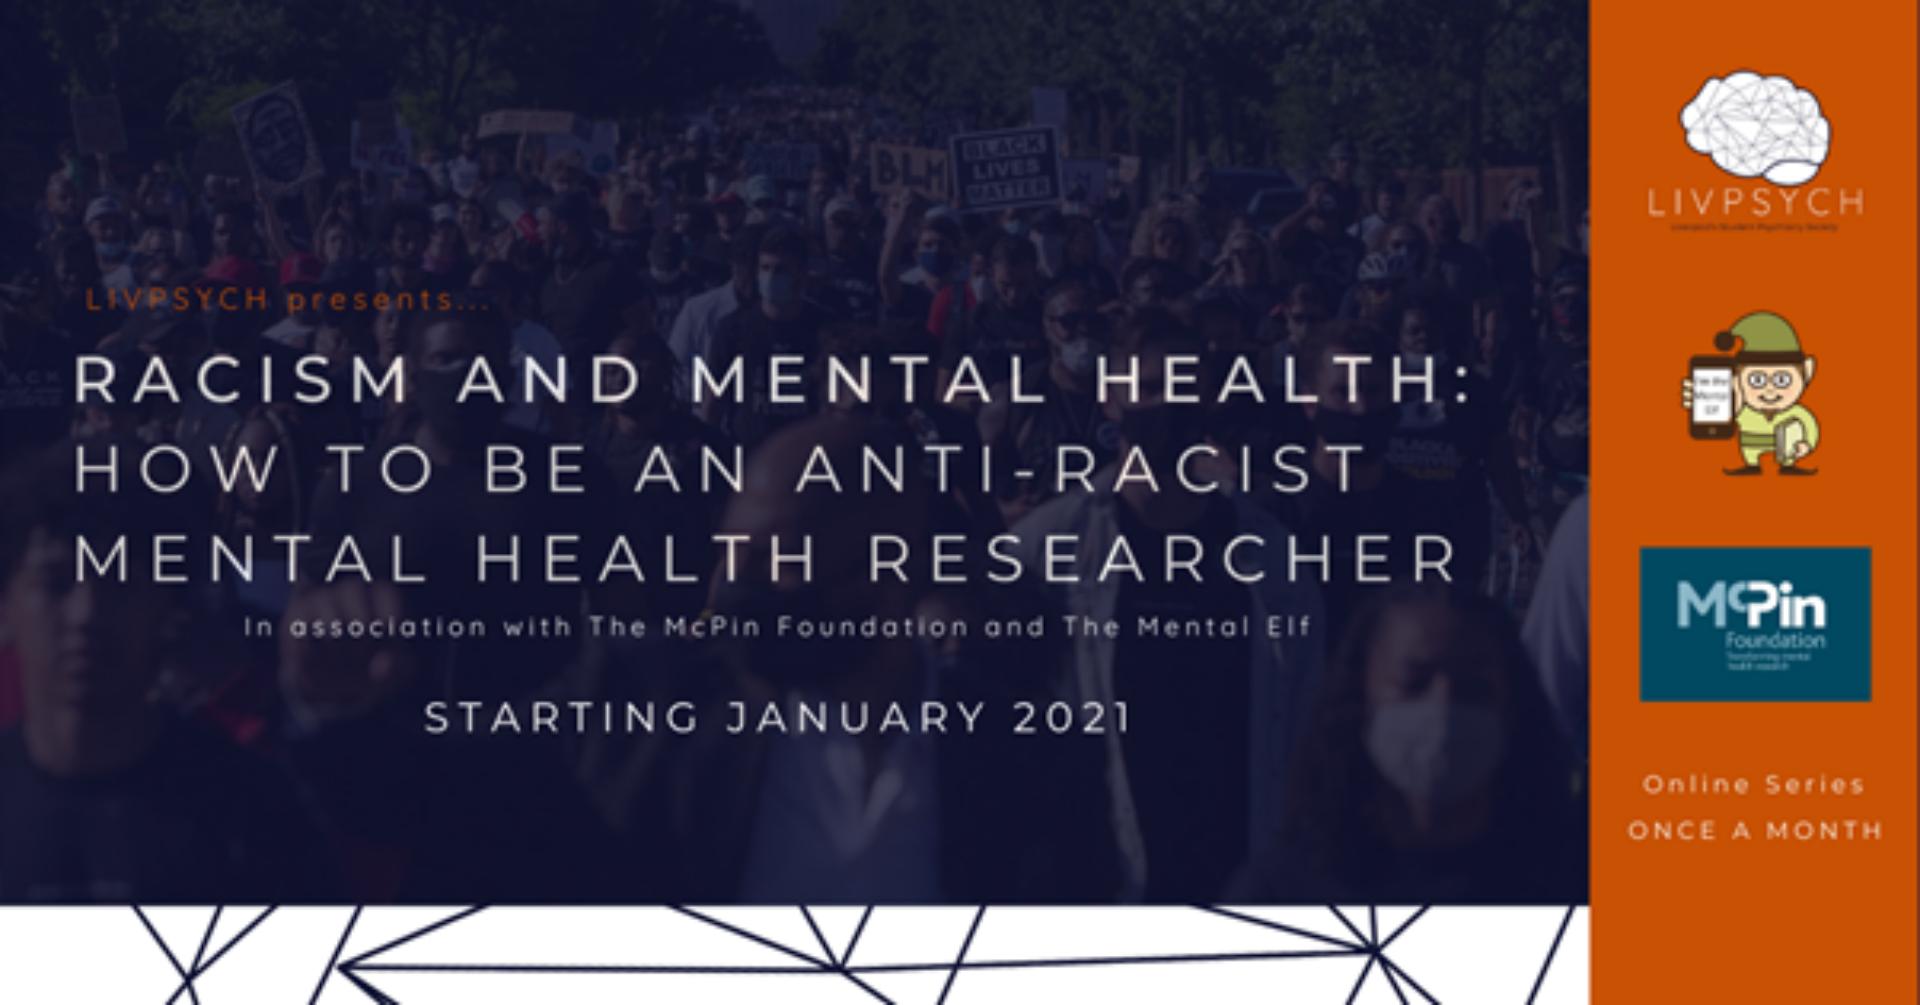 How to become an anti-racist mental health researcher